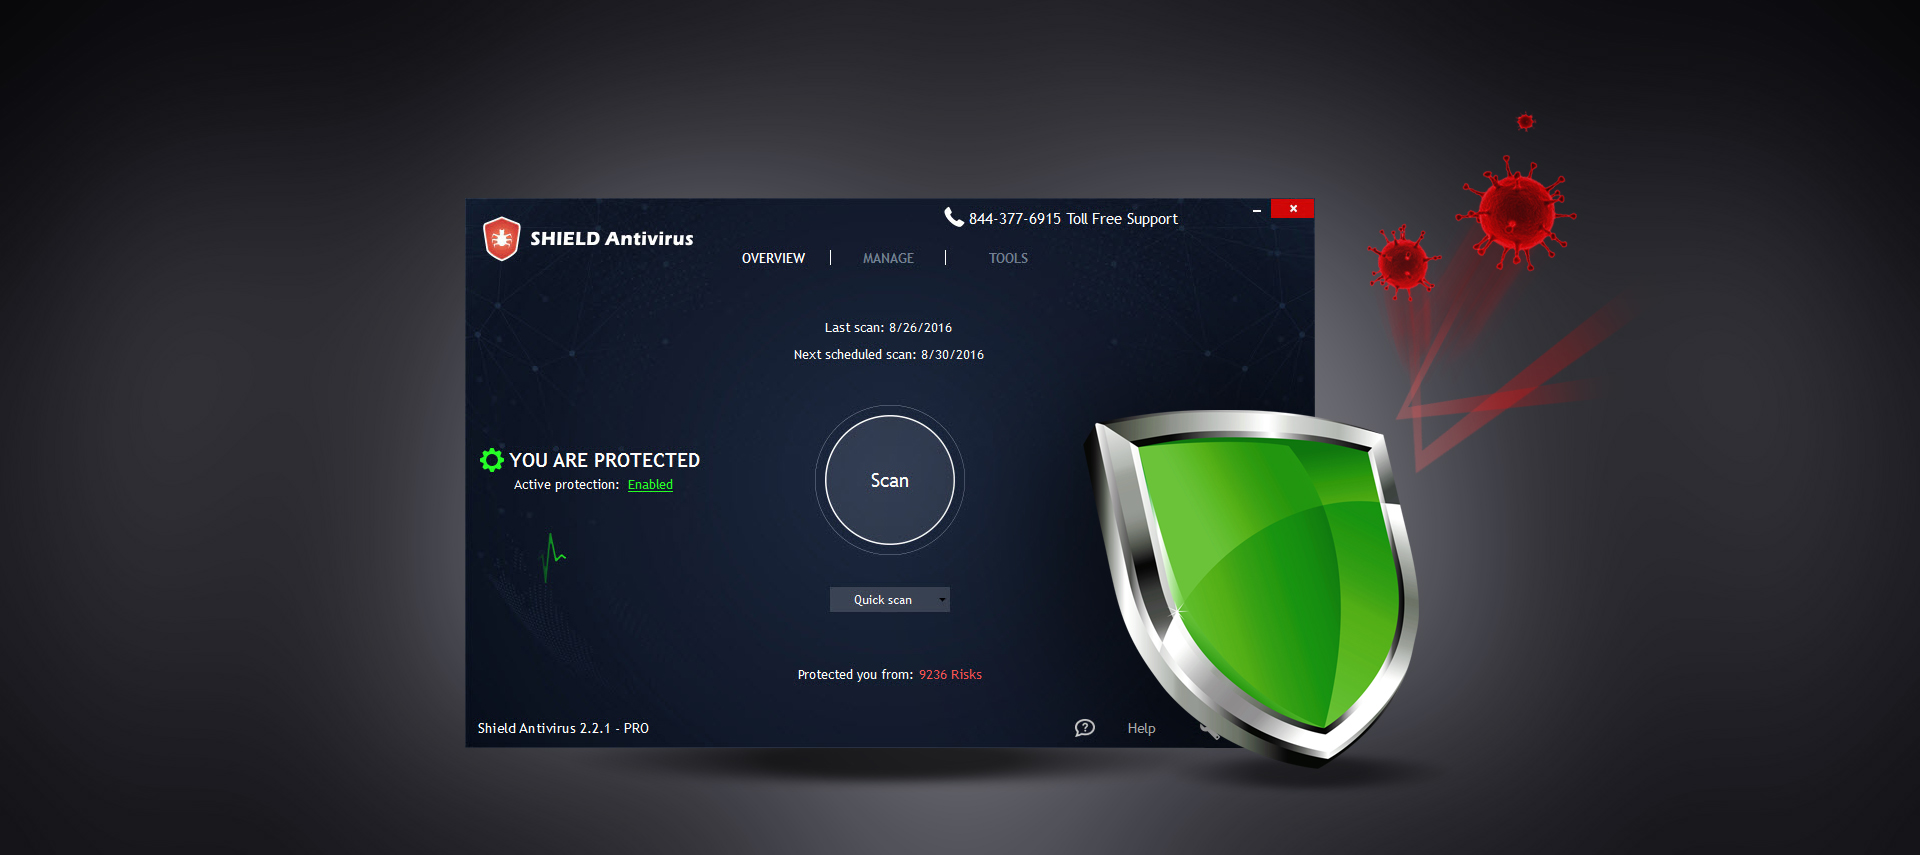 Shield Antivirus Pro 5.2.4 download the new for apple